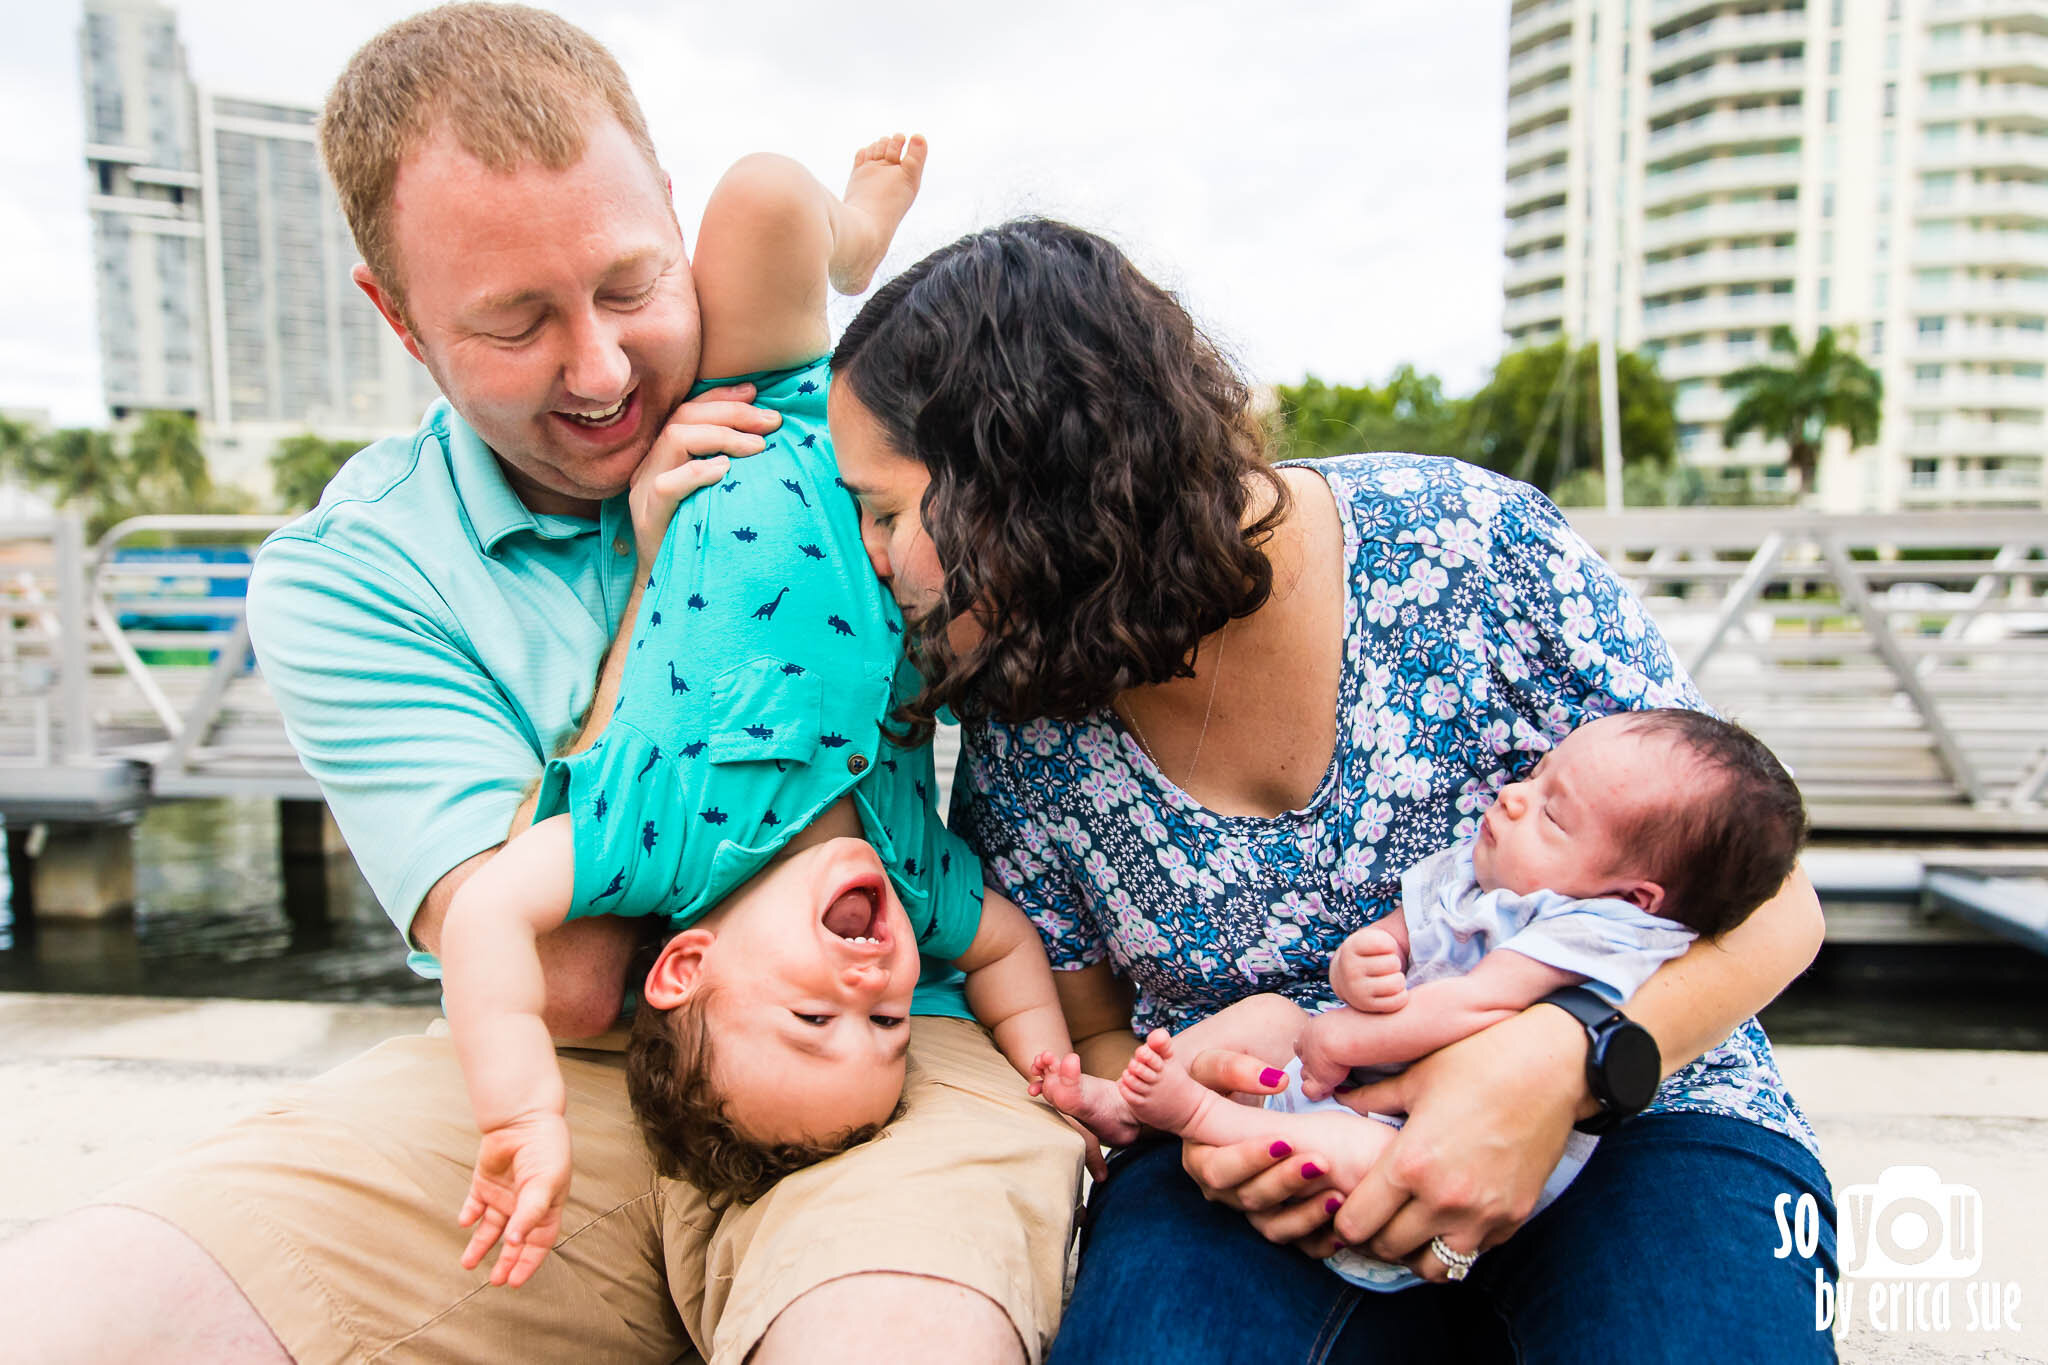 13-so-you-by-erica-sue-riverwalk-ft-lauderdale-extended-family-newborn-photographer-CD8A7146.jpg